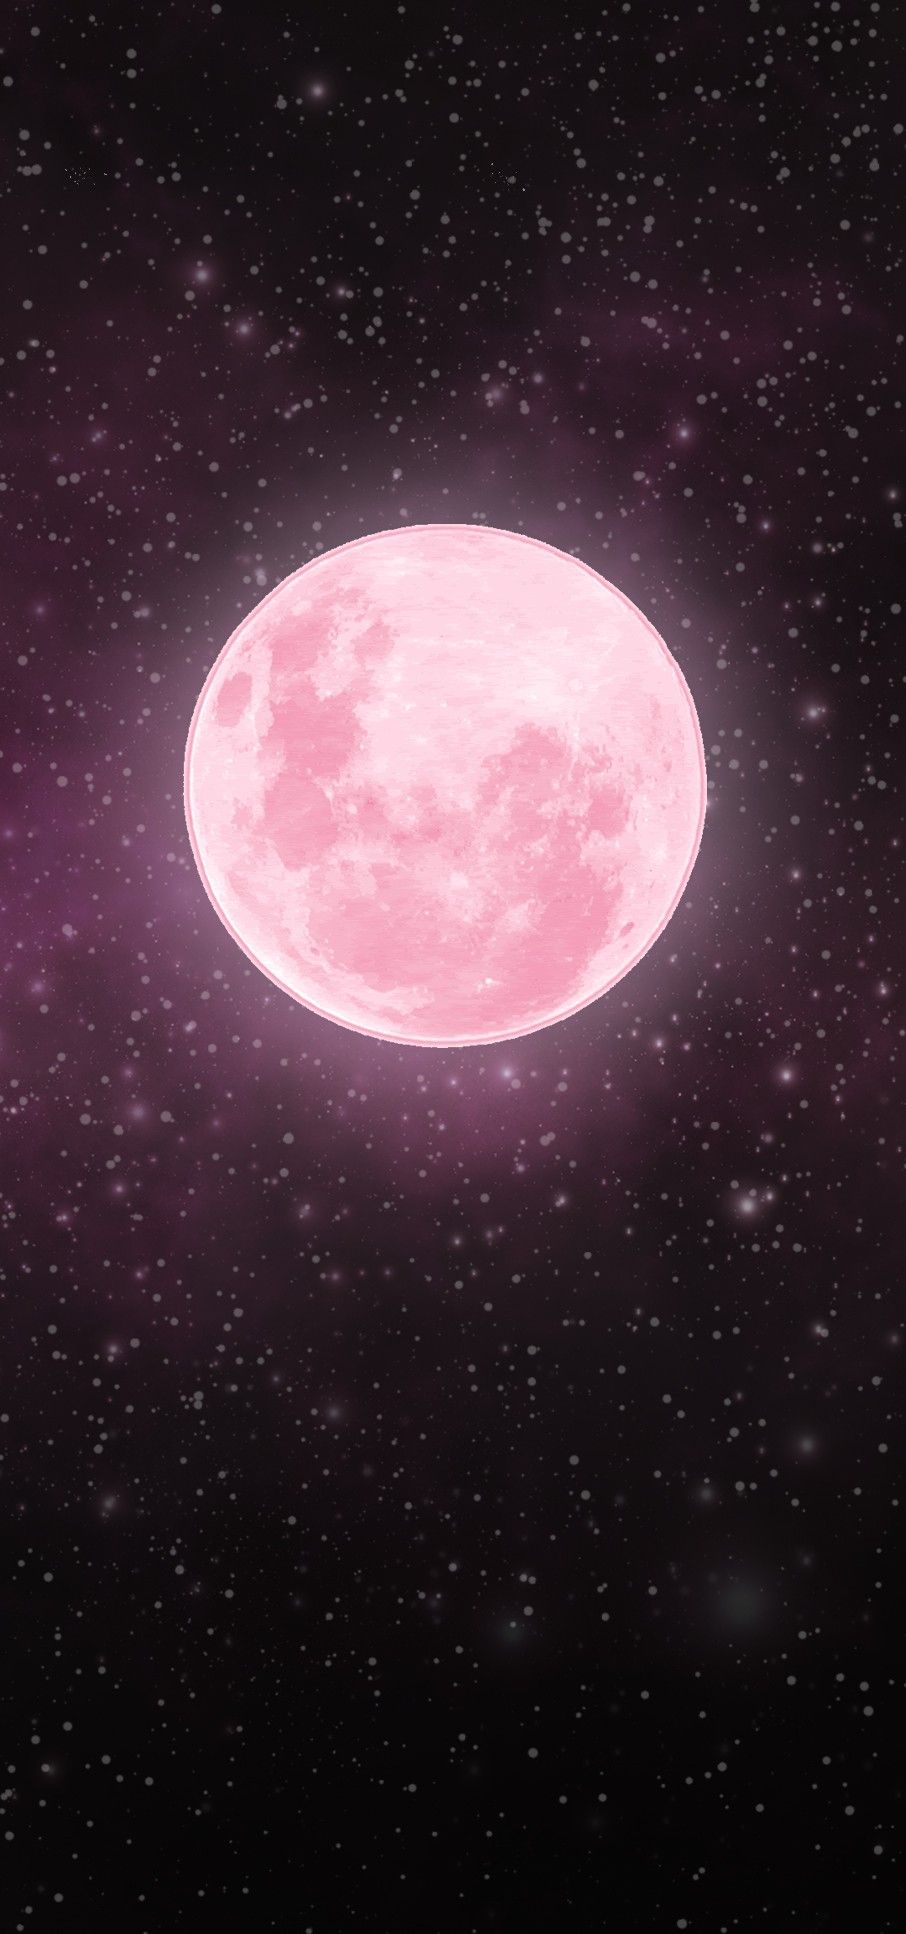 Pink And White Moon And Stars Wallpapers - Wallpaper Cave